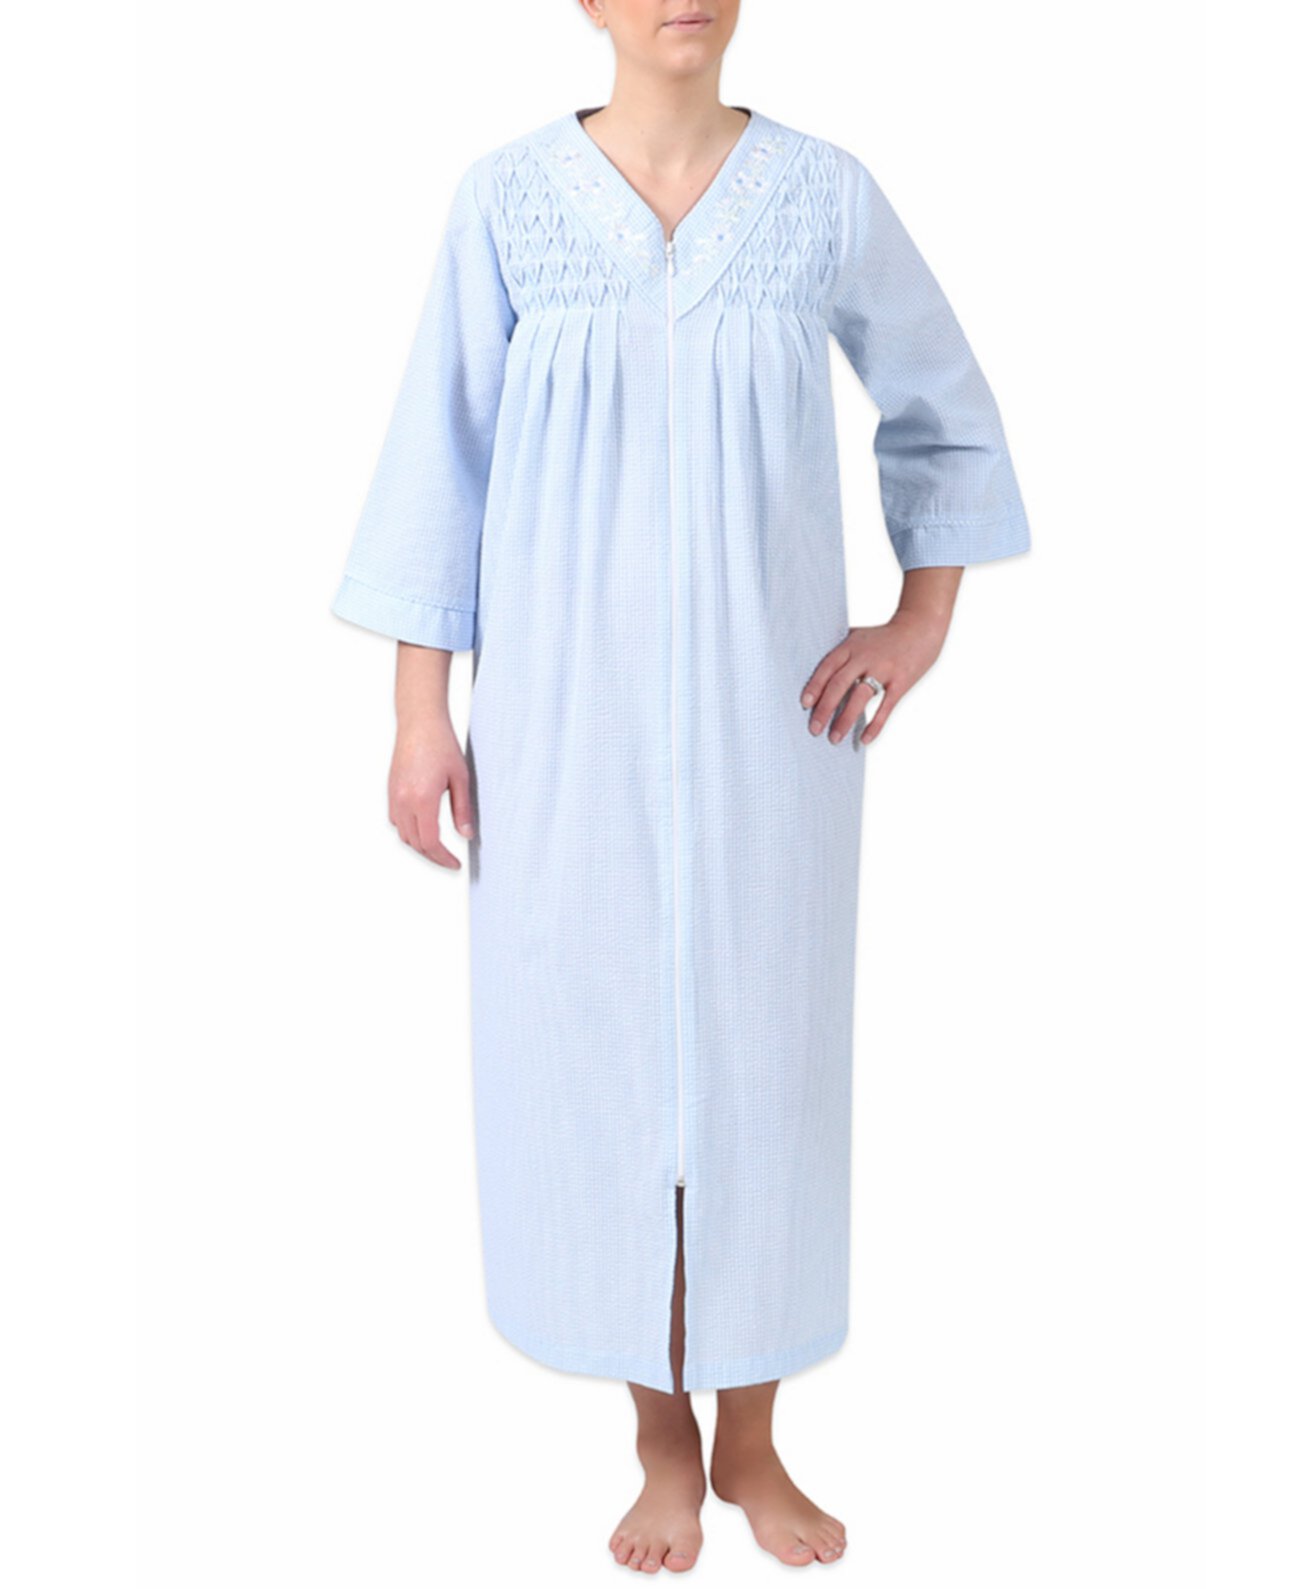 Plus Size Embroidered Gingham Robe Miss Elaine